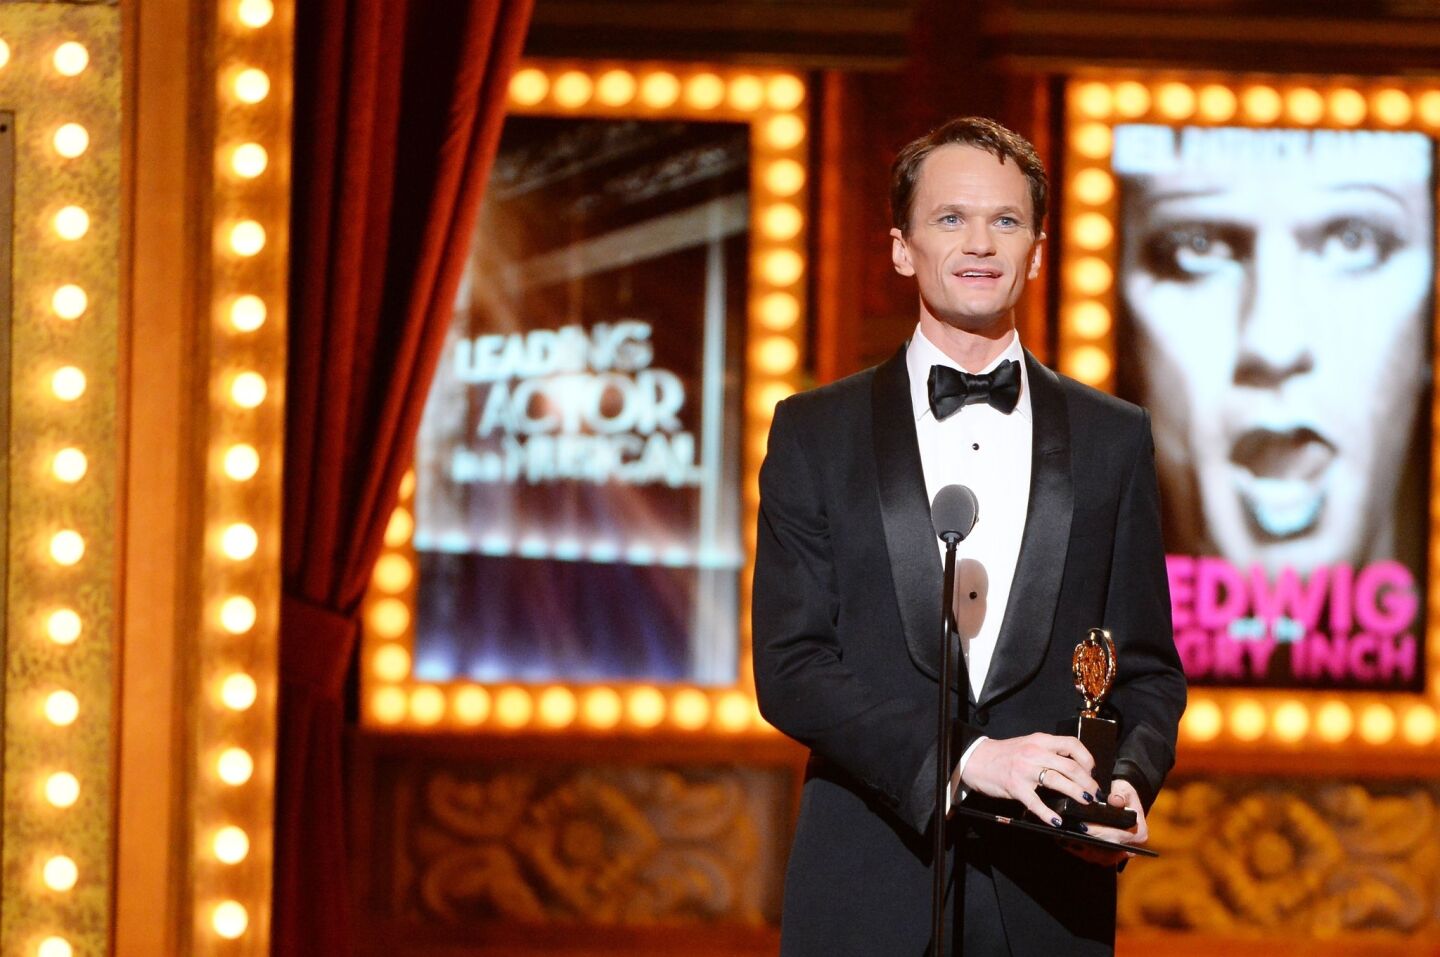 Neil Patrick Harris accepts the award for best performance by an actor in a leading role in a musical for "Hedwig and the Angry Inch."